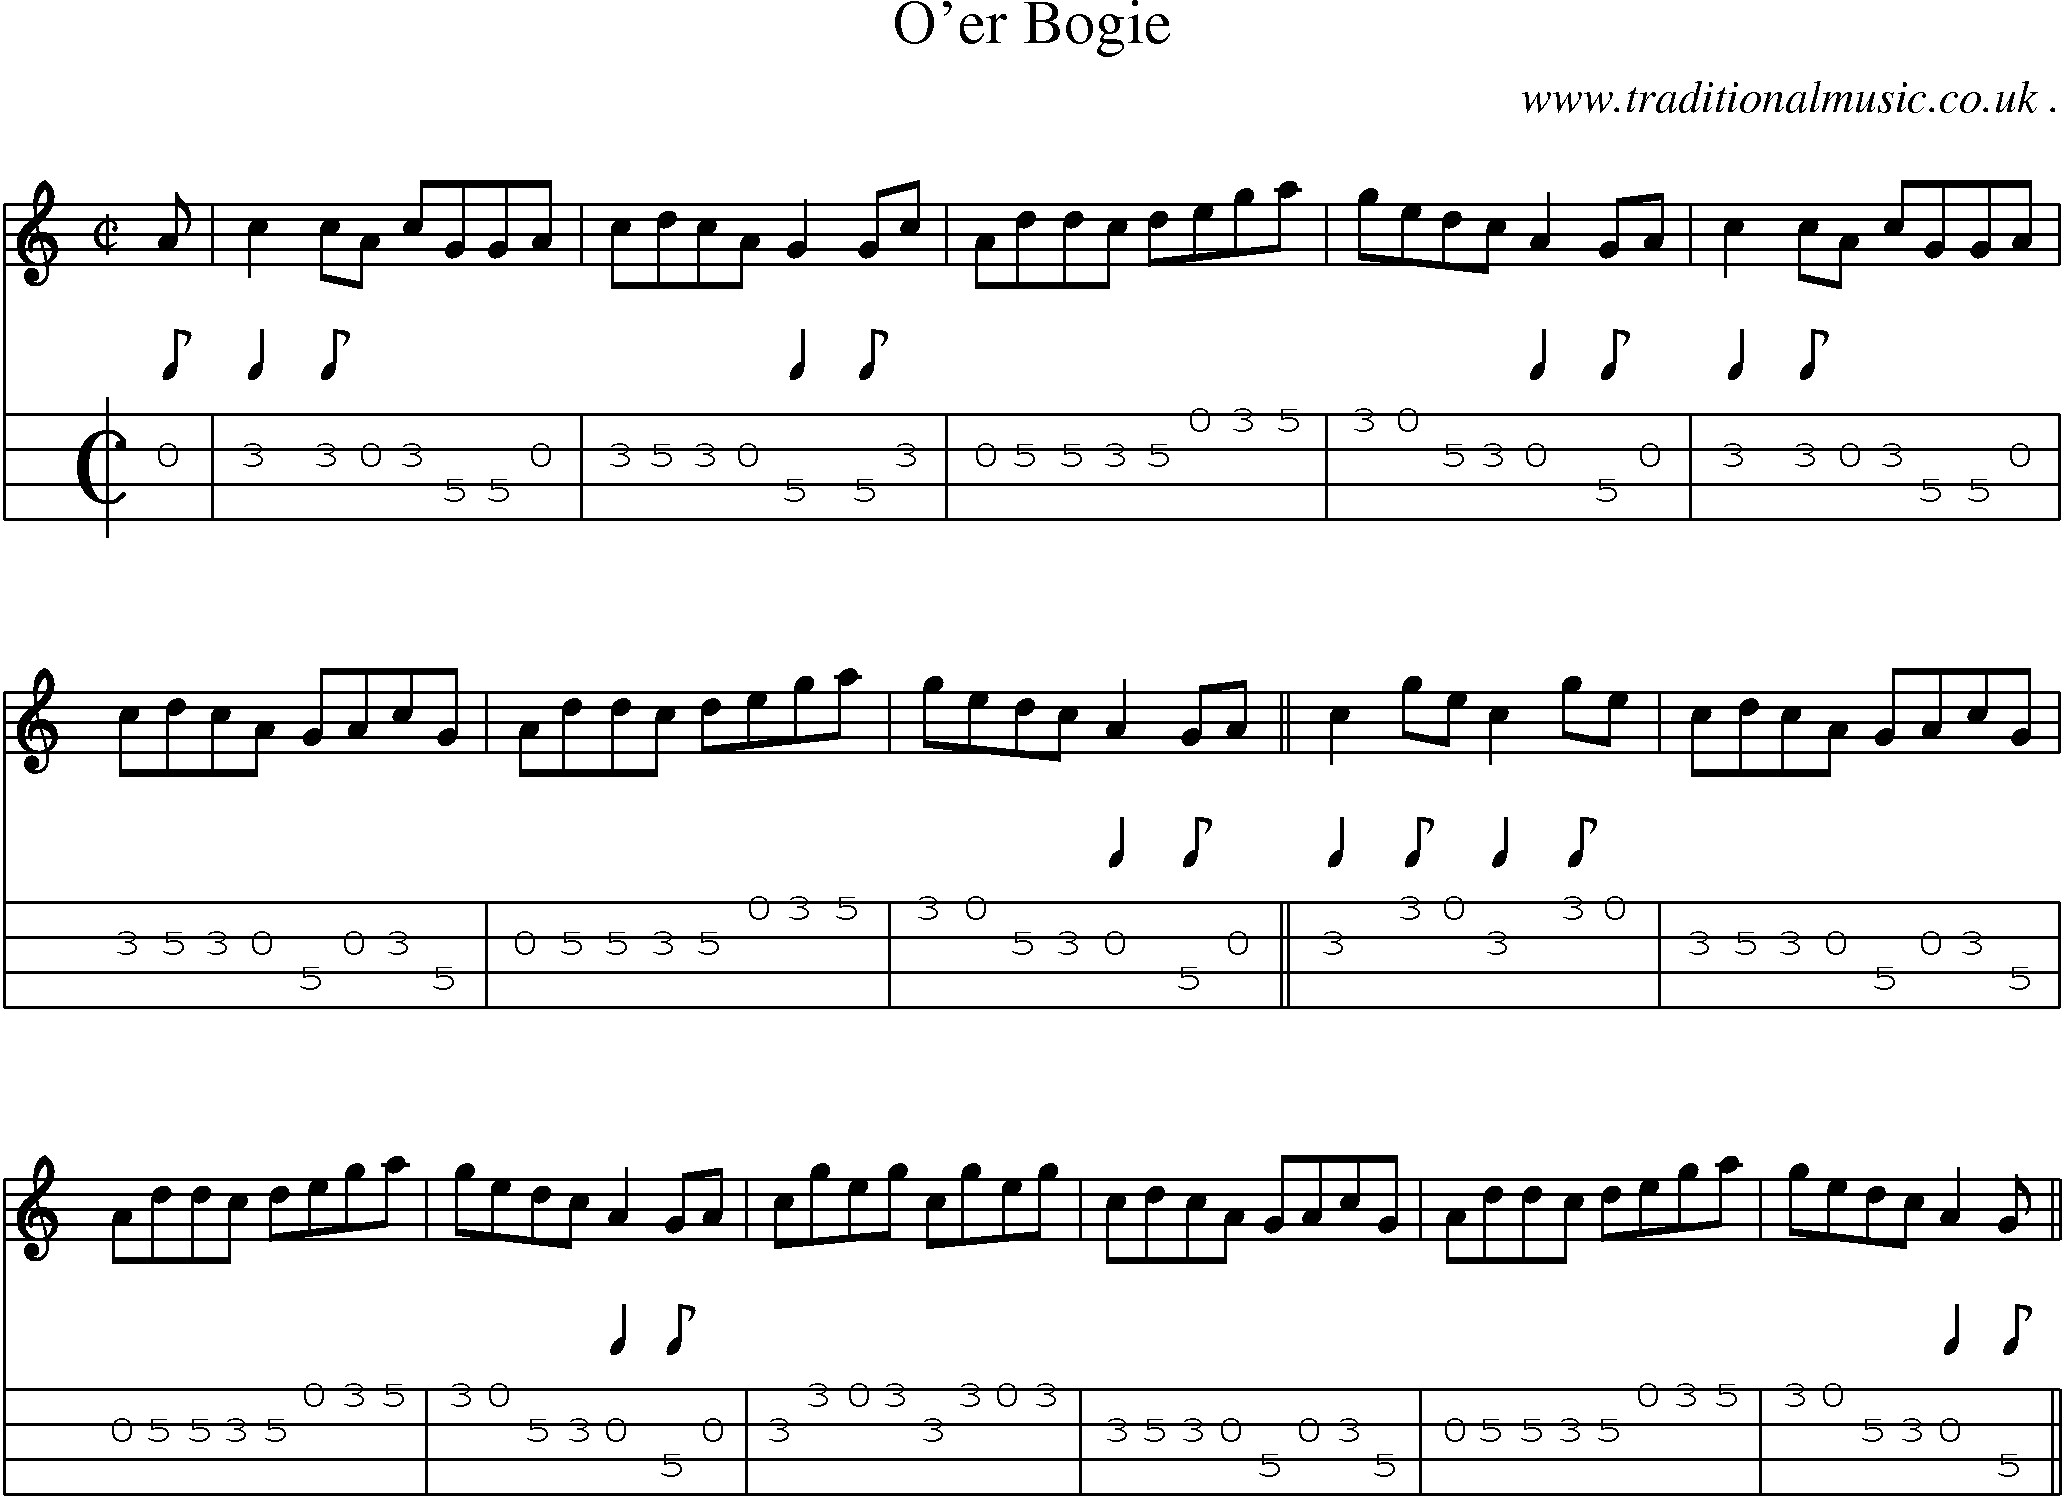 Sheet-music  score, Chords and Mandolin Tabs for Oer Bogie